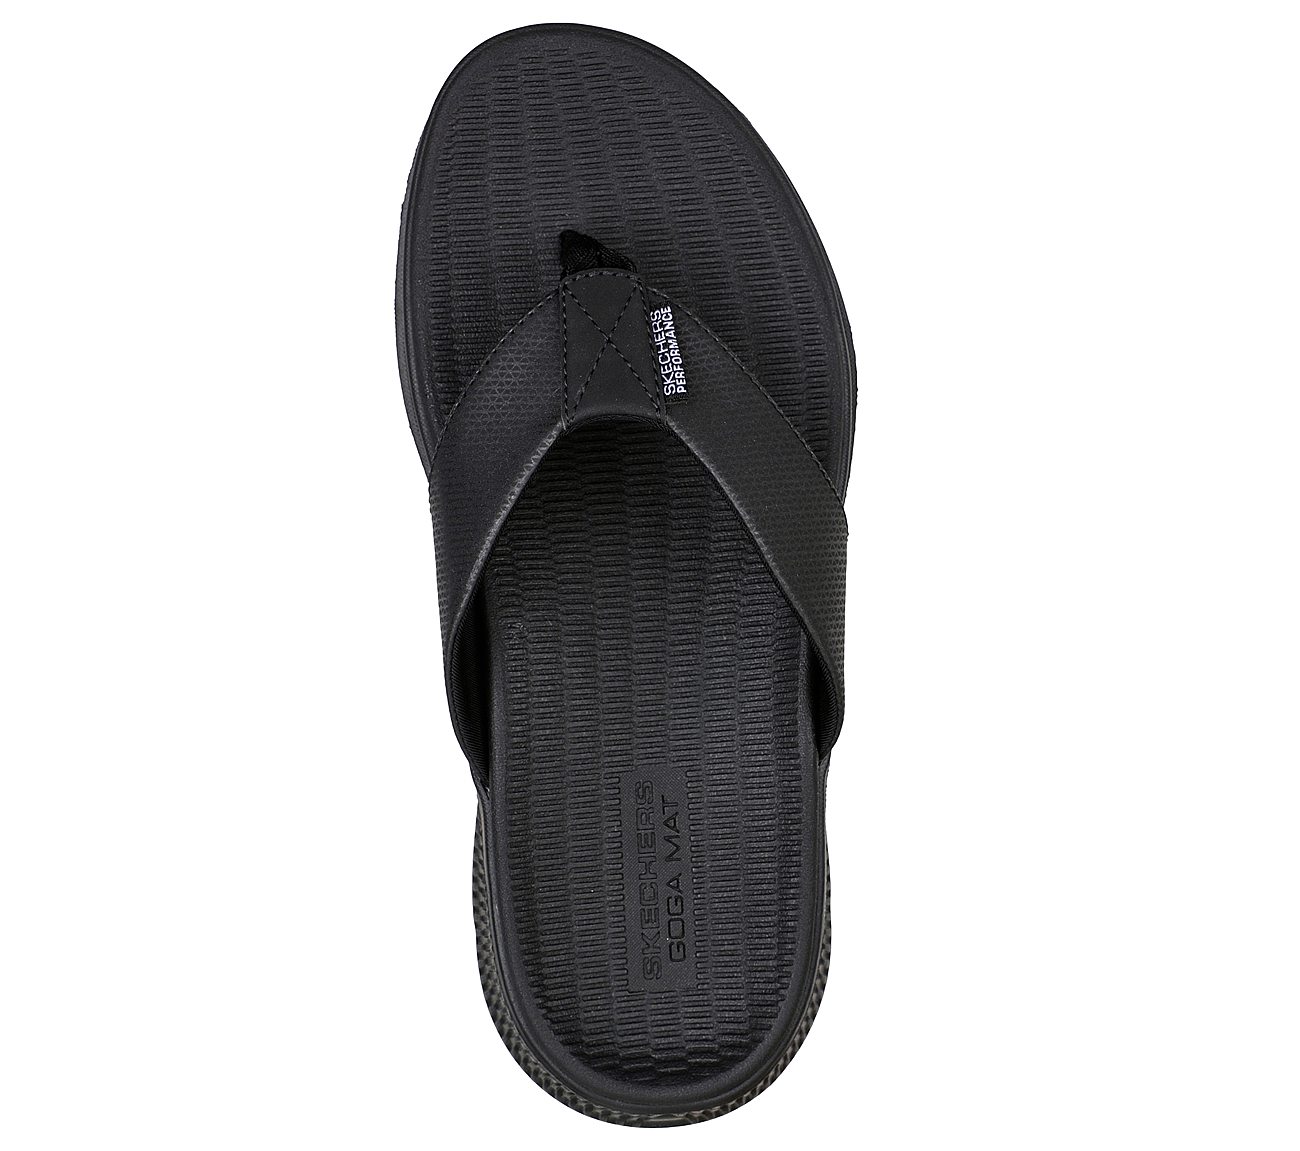 GO CONSISTENT SANDAL-SYNTHWAV, BBLACK Footwear Top View